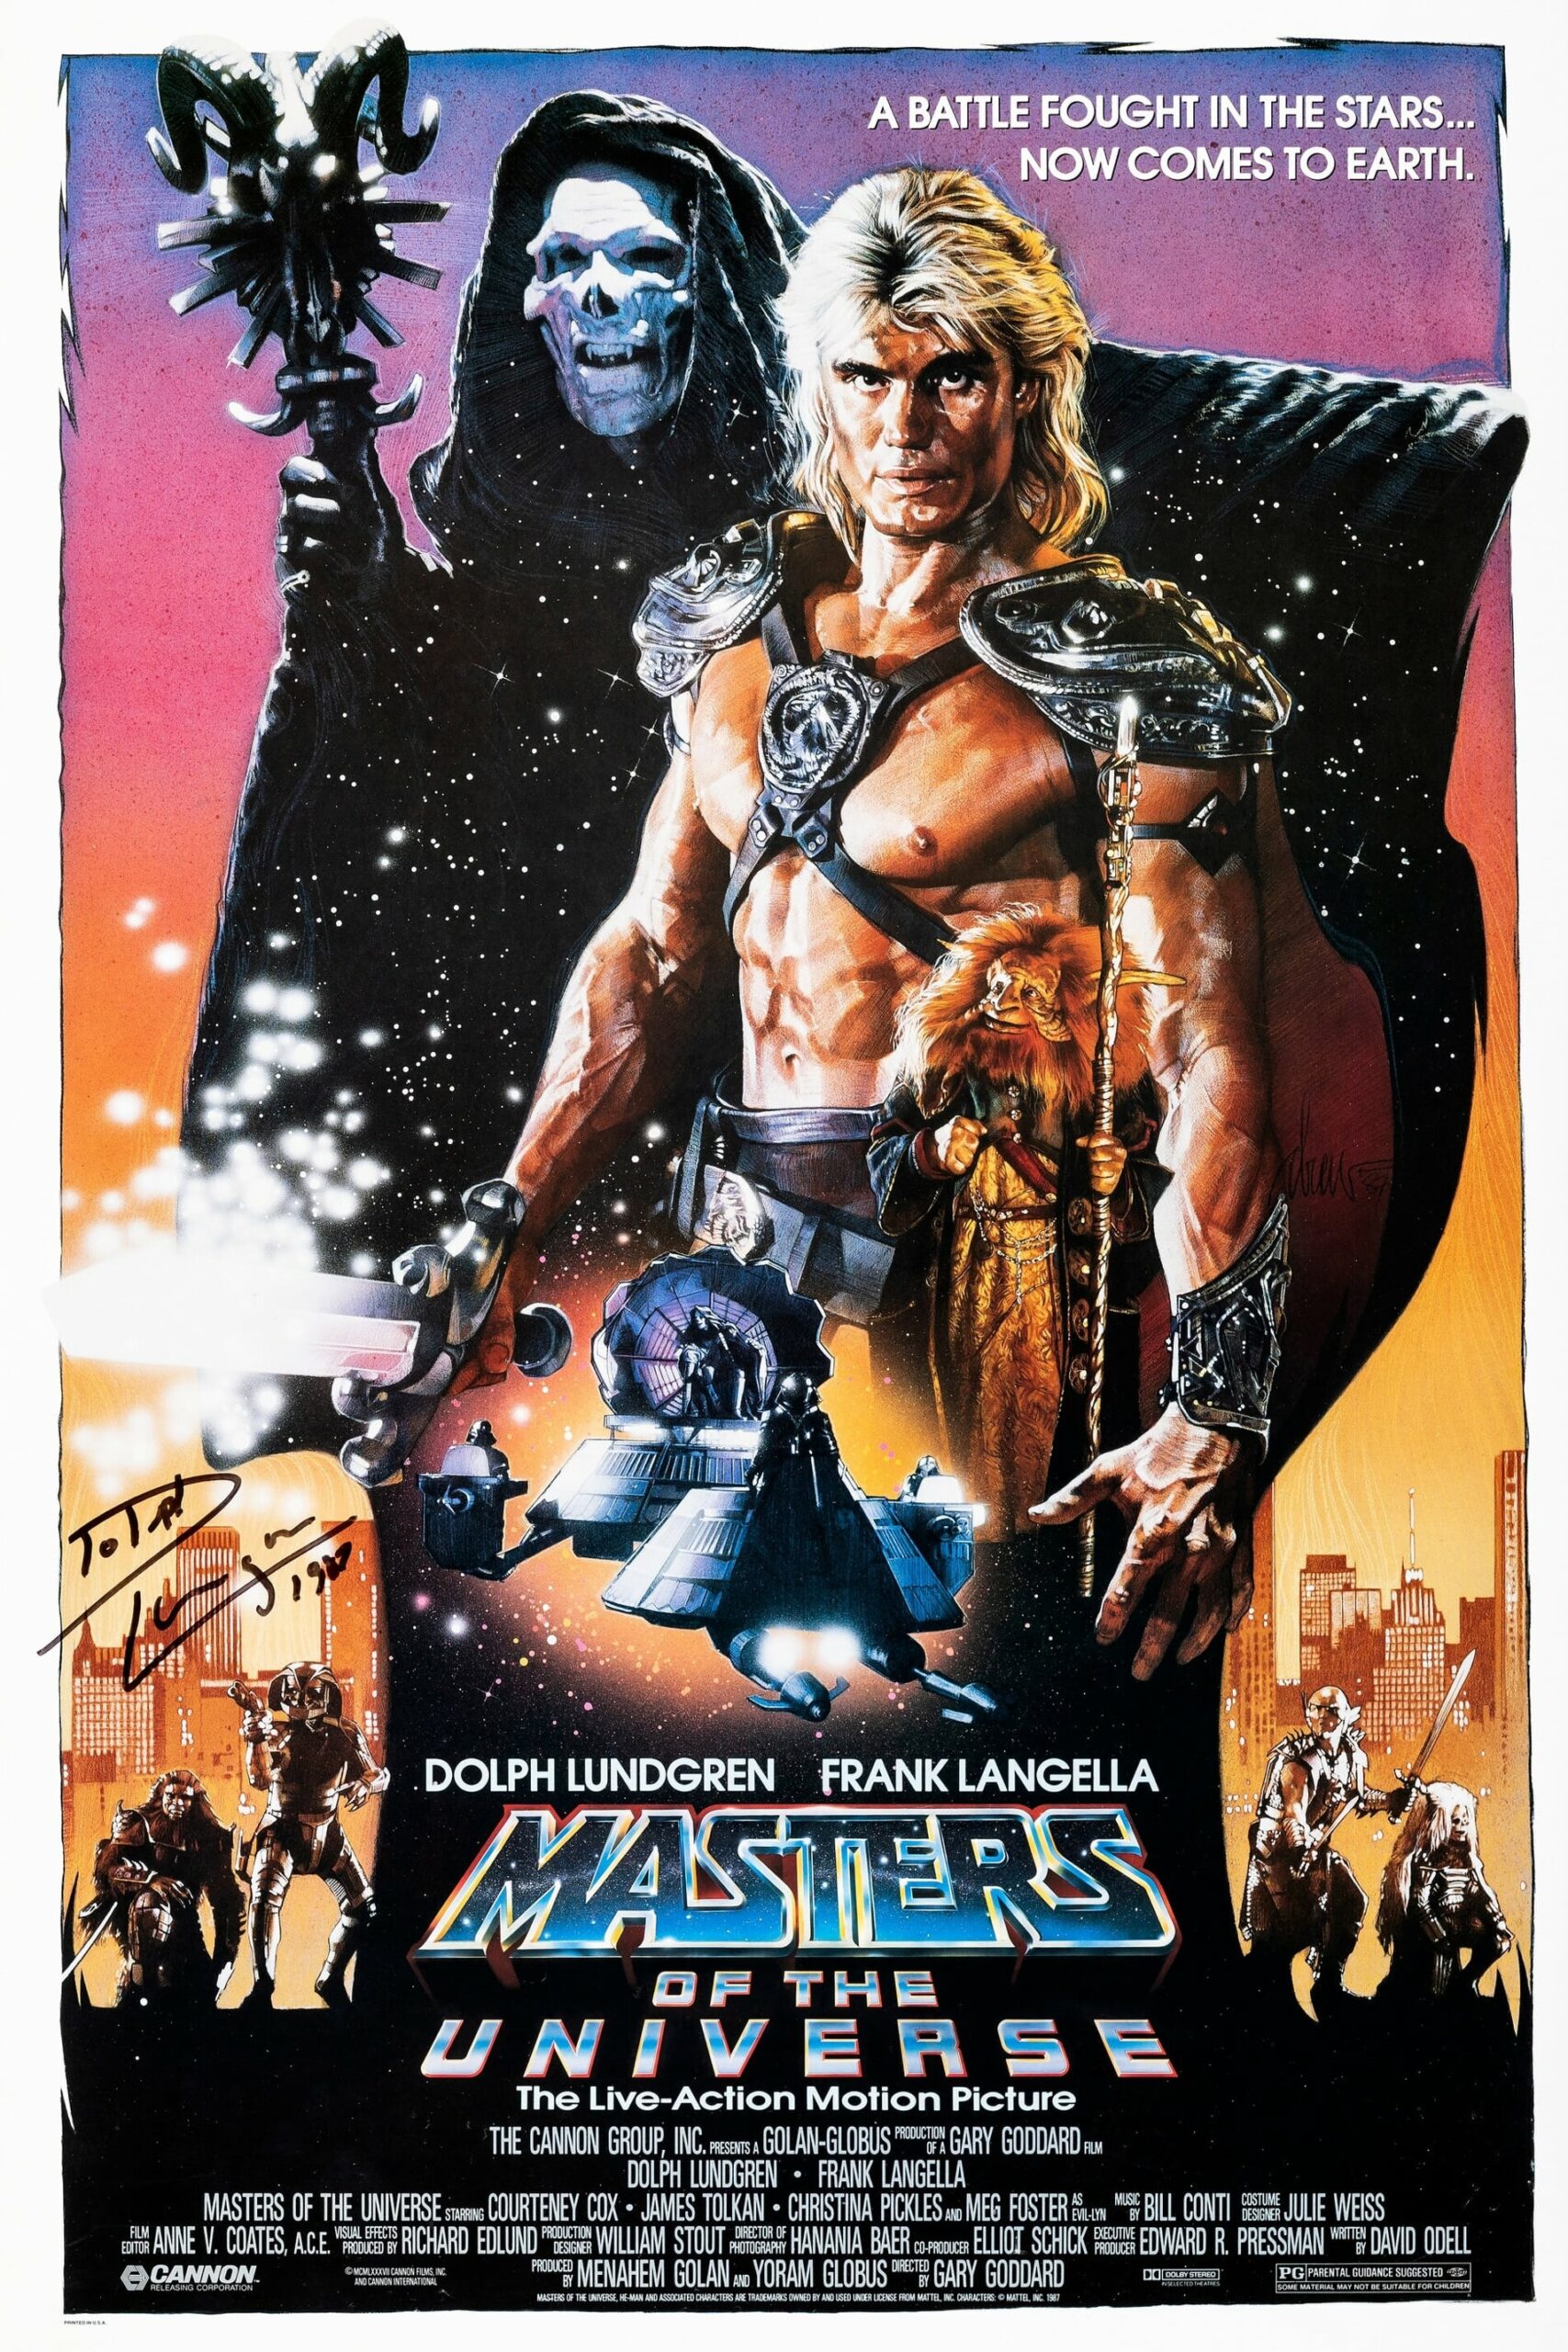 Poster for "Masters of the Universe"